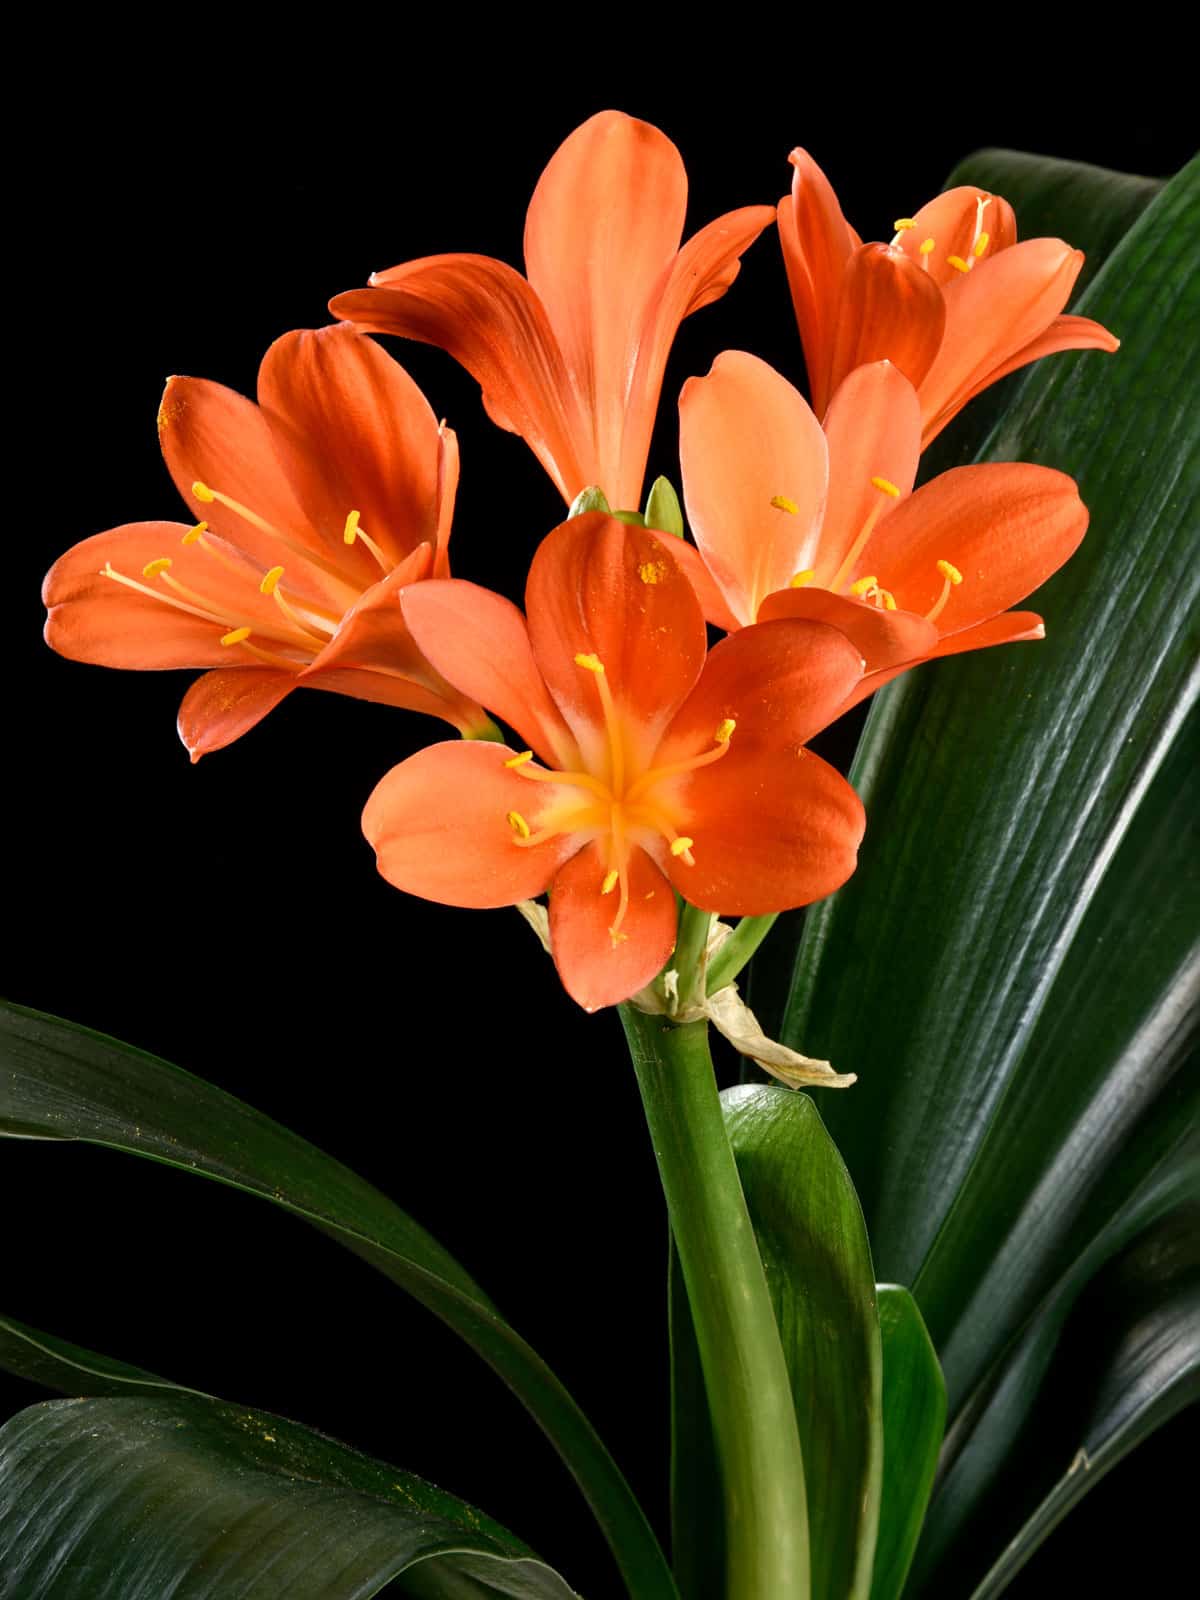 Blooming bright orange leaves of a Kaffir Lily